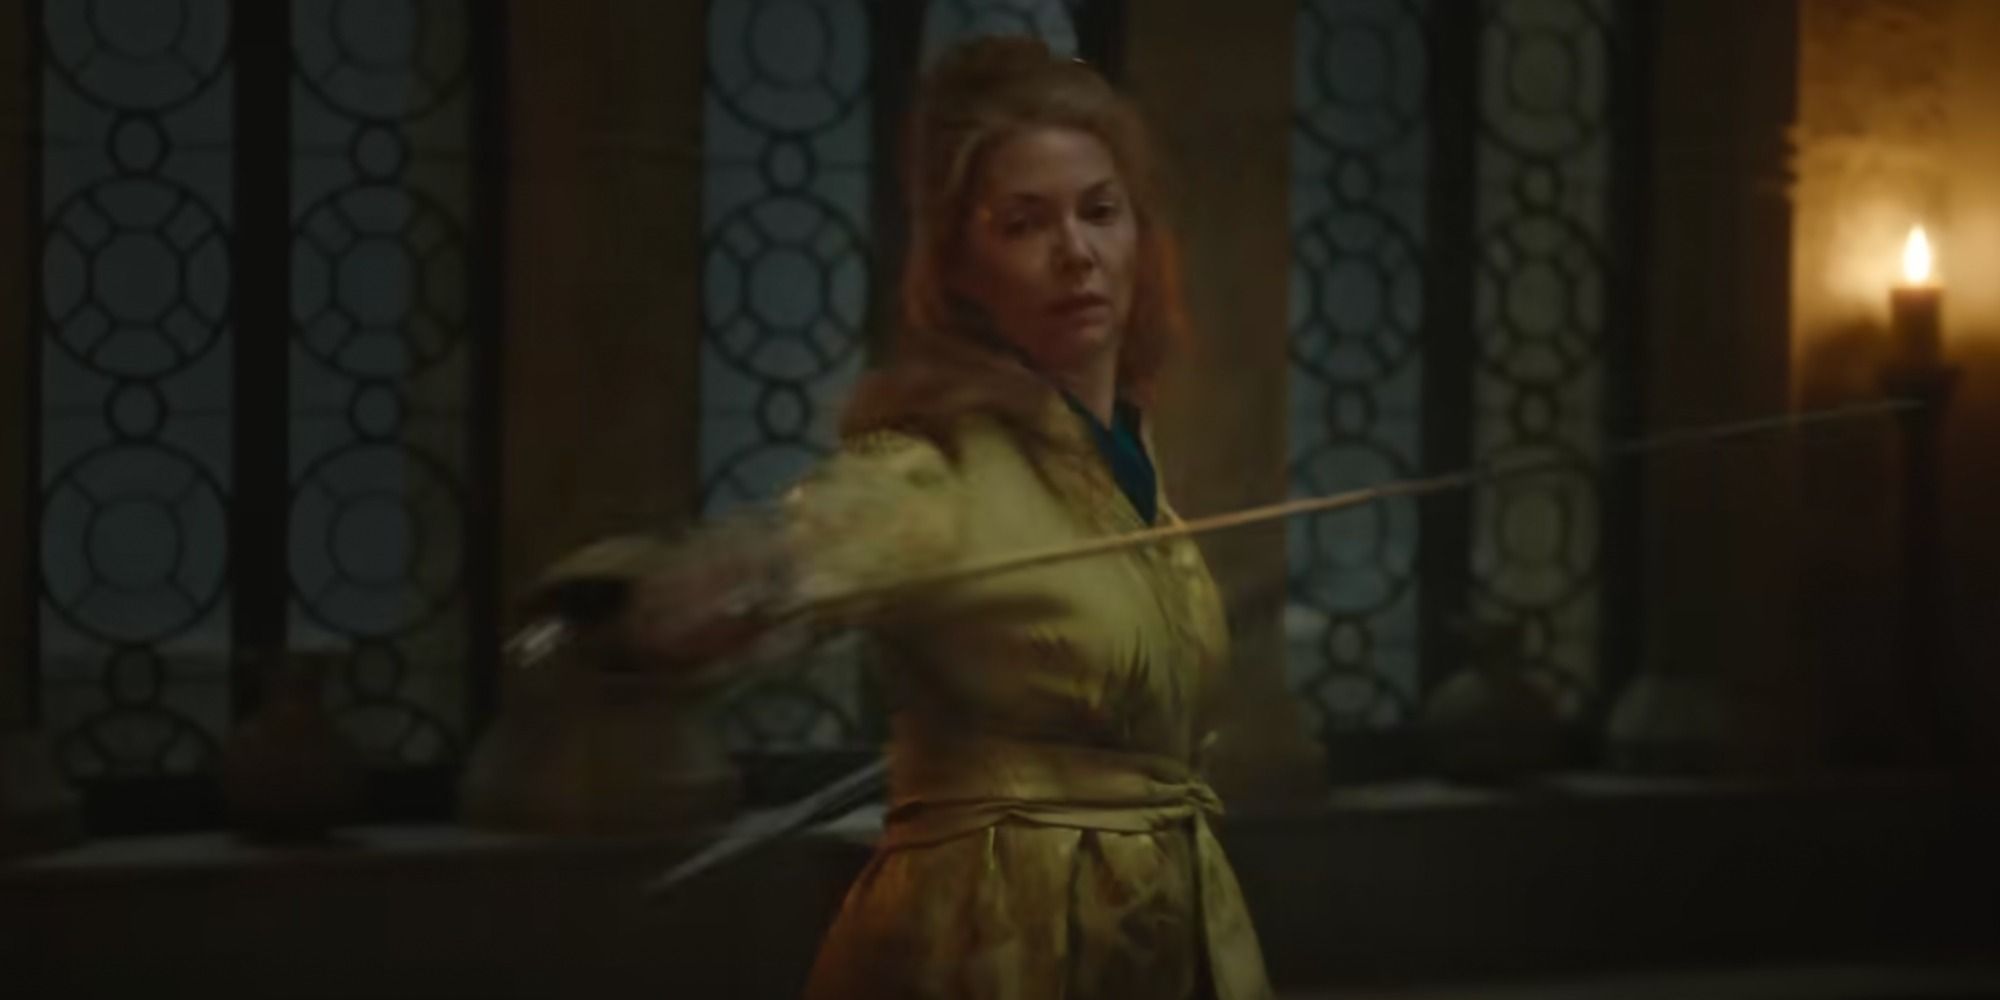 Sorsha draws a sword in the Willow teaser.